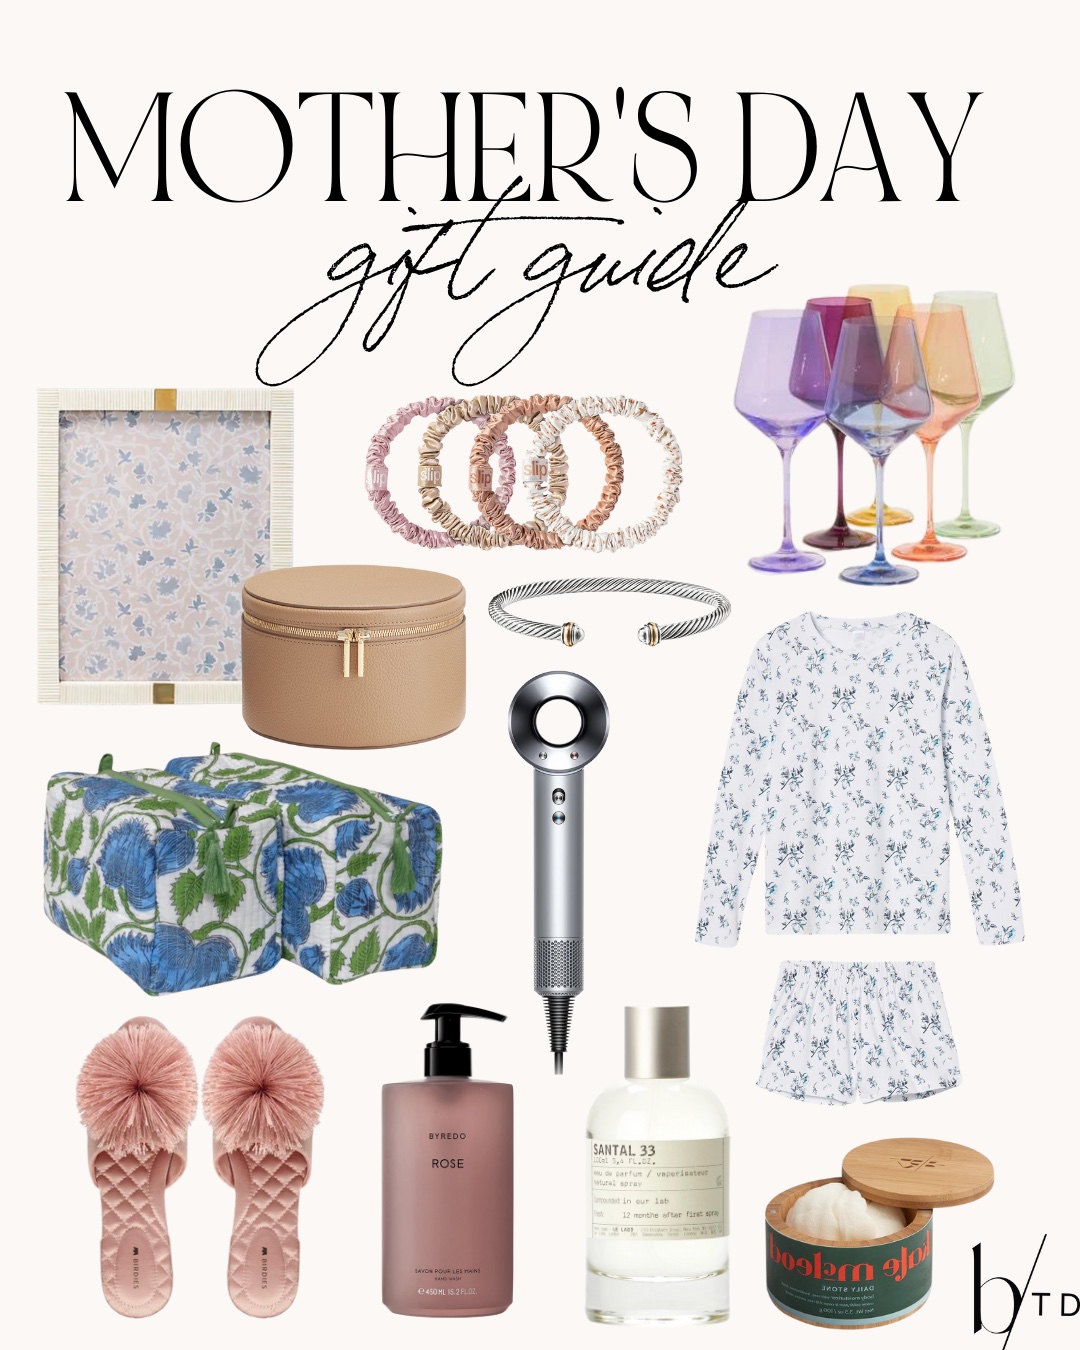 Mother's Day Gifts - Kelly in the City